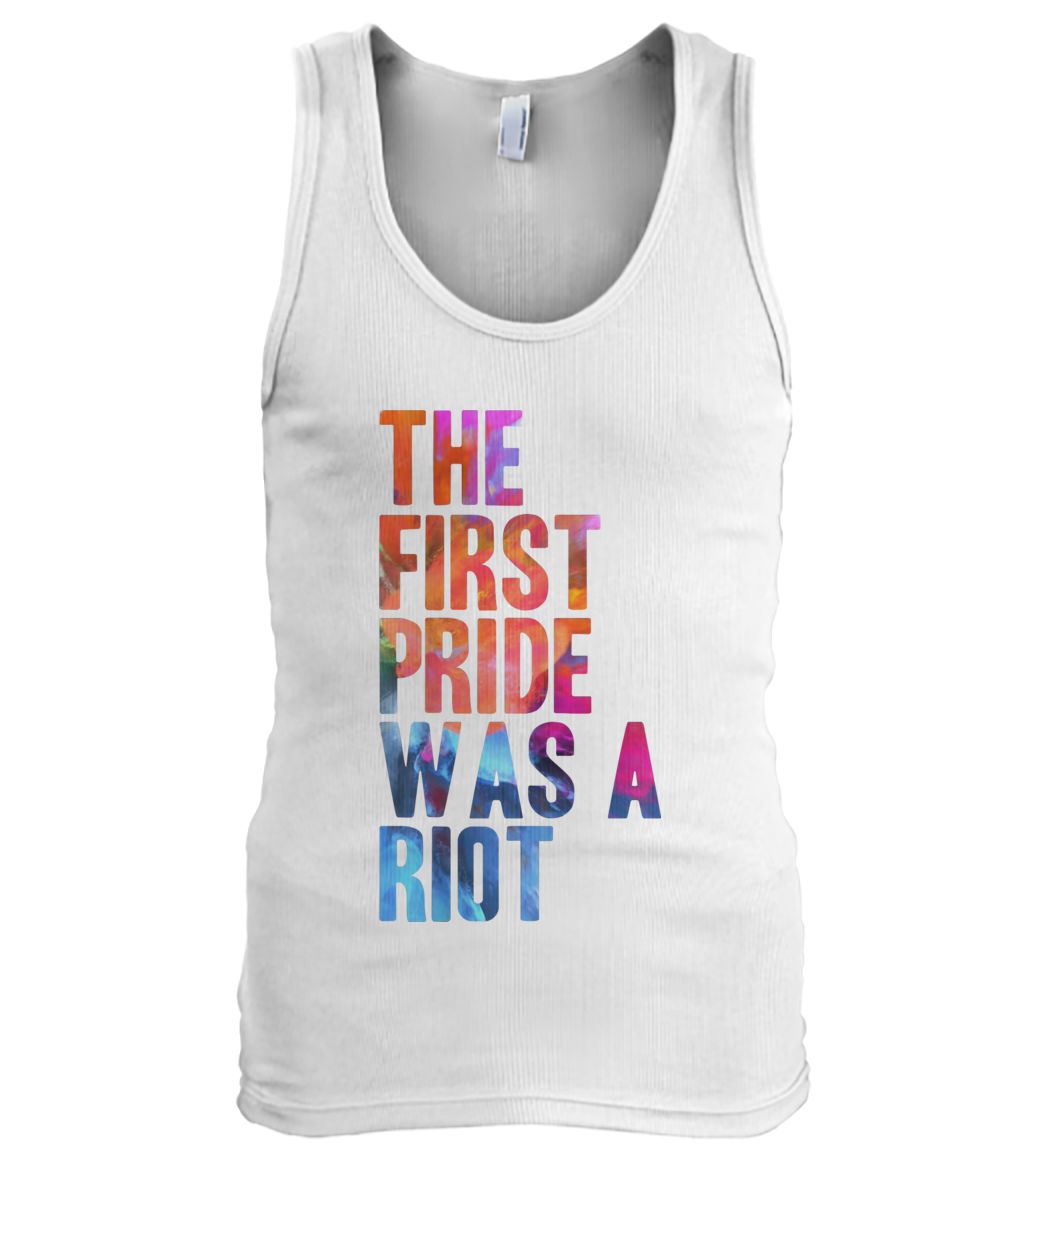 The first gay pride was a riot for lgbt pride men's tank top